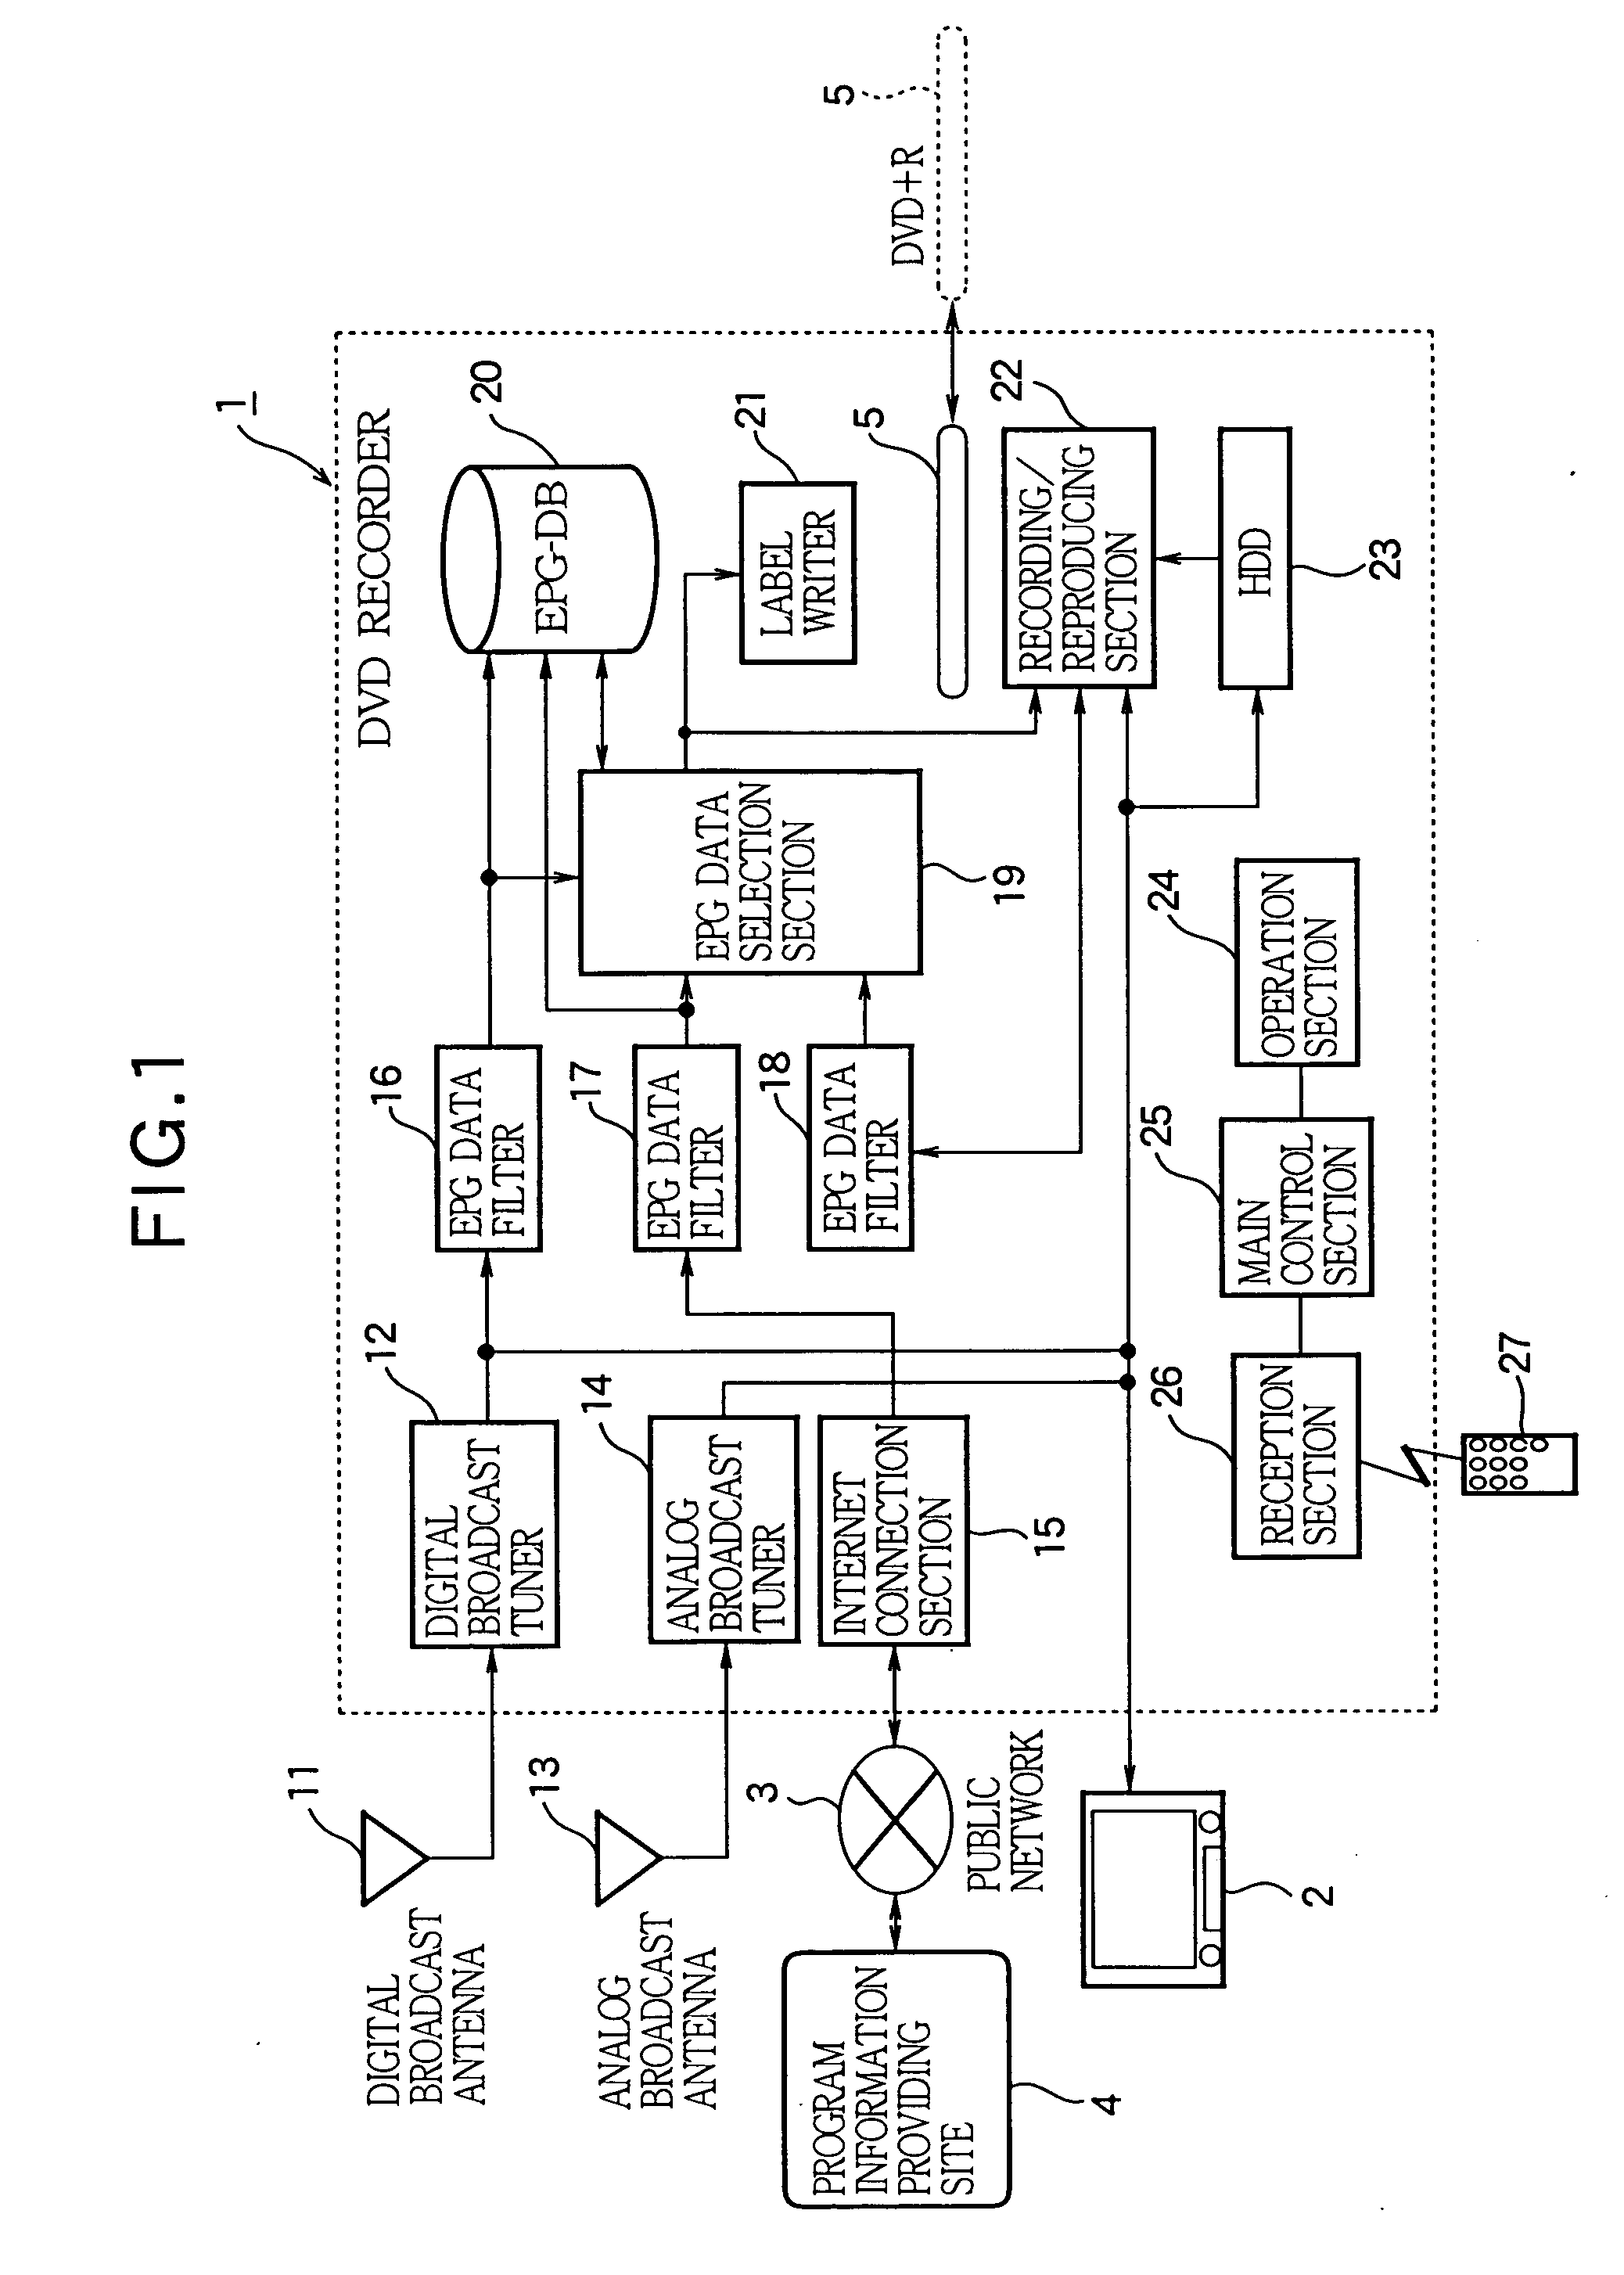 Optical disk apparatus capable of recording broadcast program with visible symbol